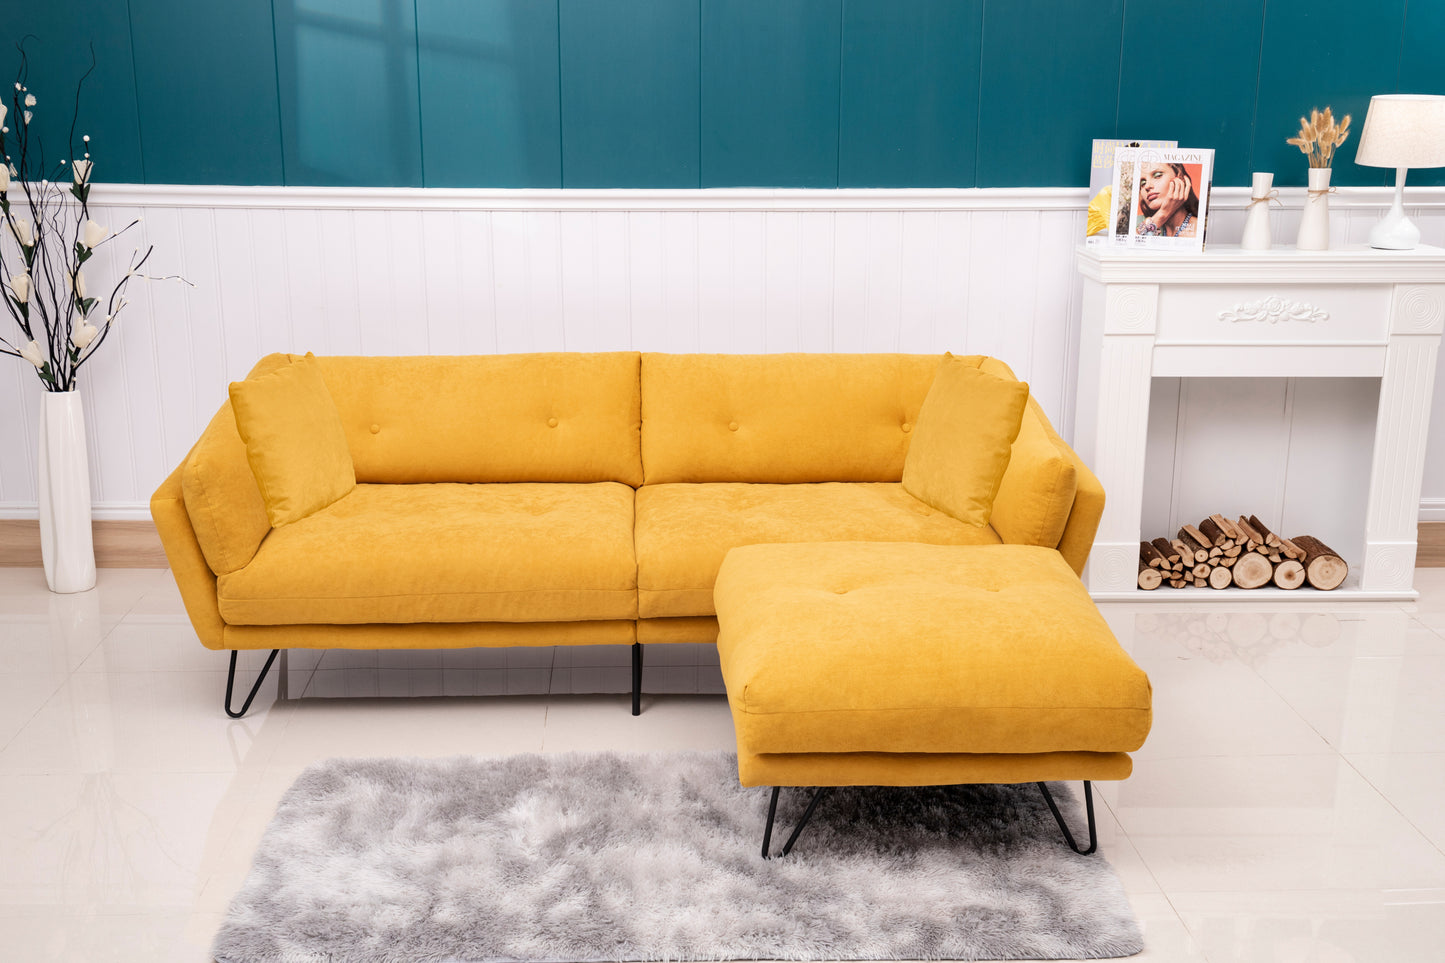 2148 sofa includes 2 pillows 85.8" yellow chenille fabric sofa for small spaces